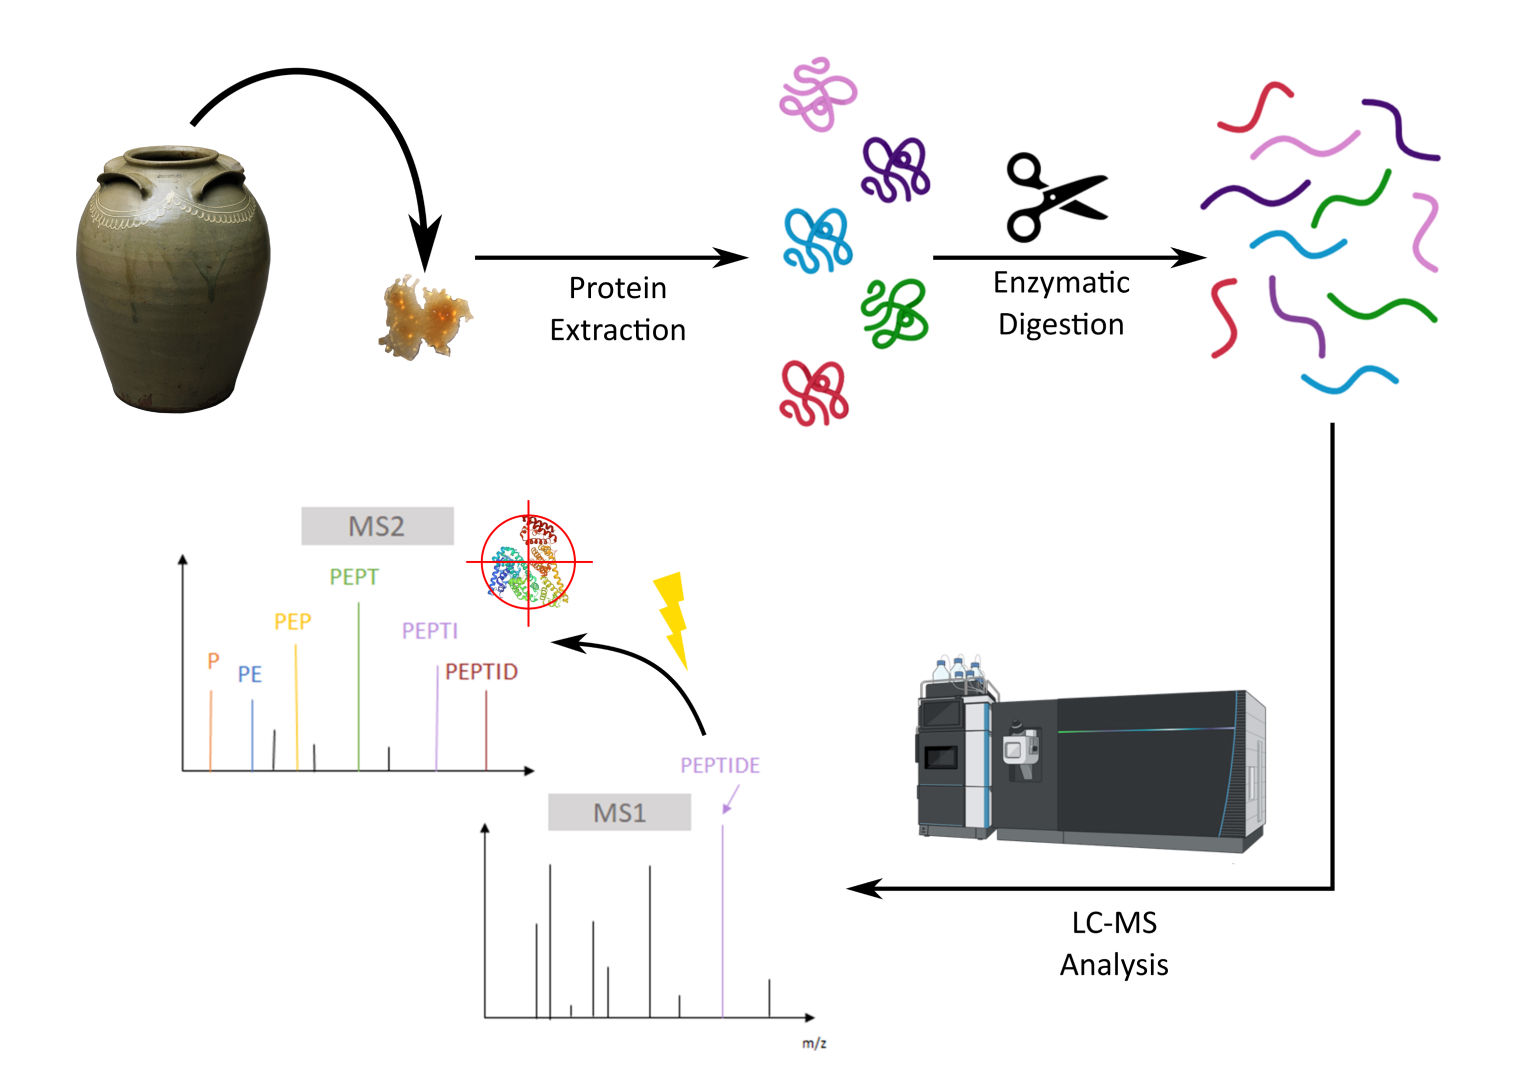 A flow-chart diagram illustrates how residue samples collected from a jar are broken down through protein extraction and enzymatic digestion and then analyzed by a machine that sequences sampled residue proteins for further identification.